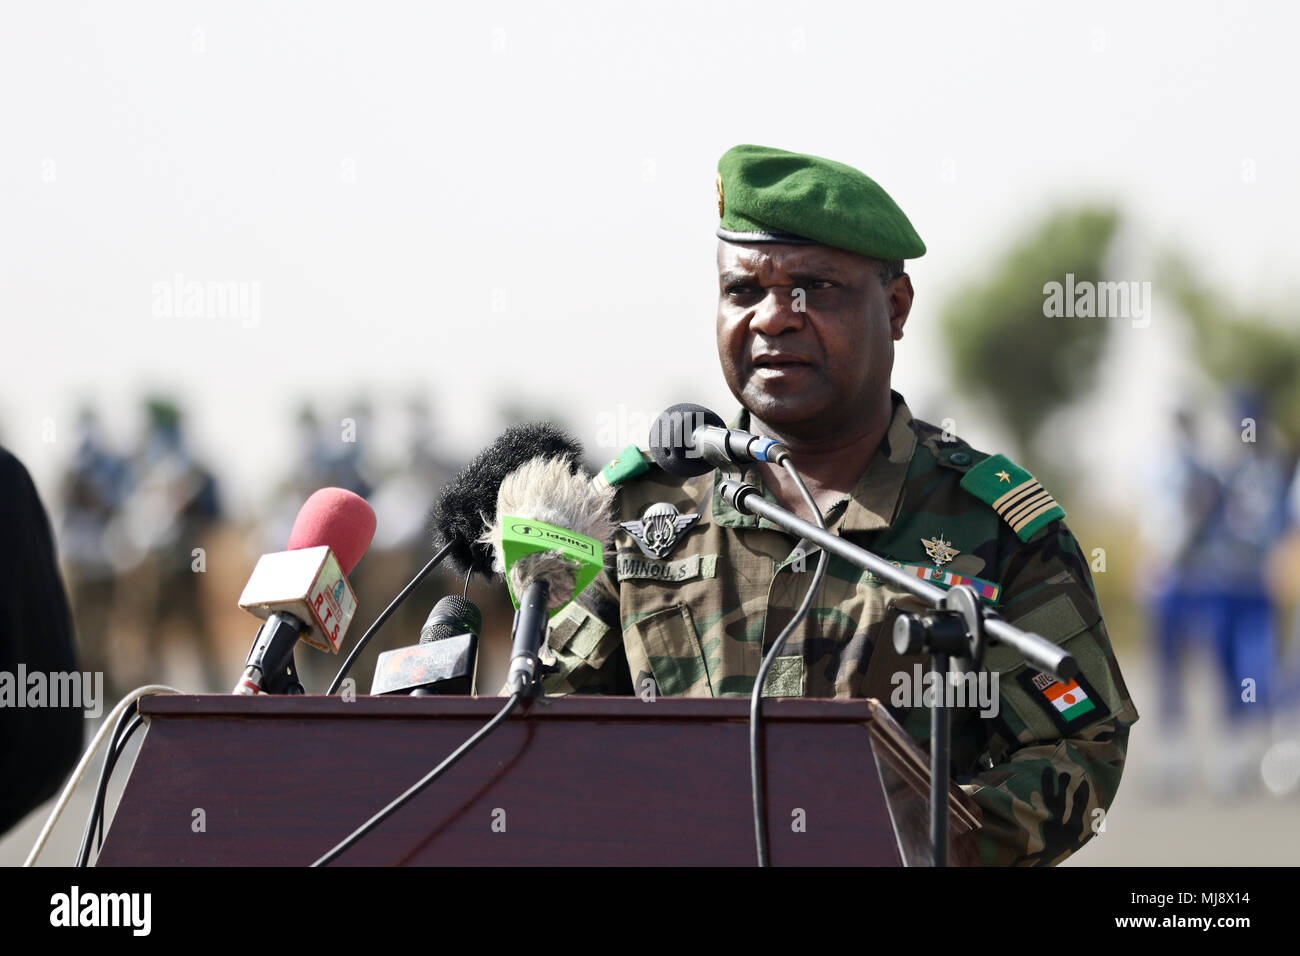 Col. Maj. Sani Mahamane Laminou, Flintlock Exercise Director, speaks during the closing ceremony of Flintlock 2018 in Niamey, Niger, April 20, 2018. Approximately 1,900 service members from more than 20 African and western partner nations are participating in Flintlock 2018 at multiple locations in Niger, Burkina Faso, and Senegal. (U.S. Army Photo by Sgt. Heather Doppke/79th Theater Sustainment Command) Stock Photo